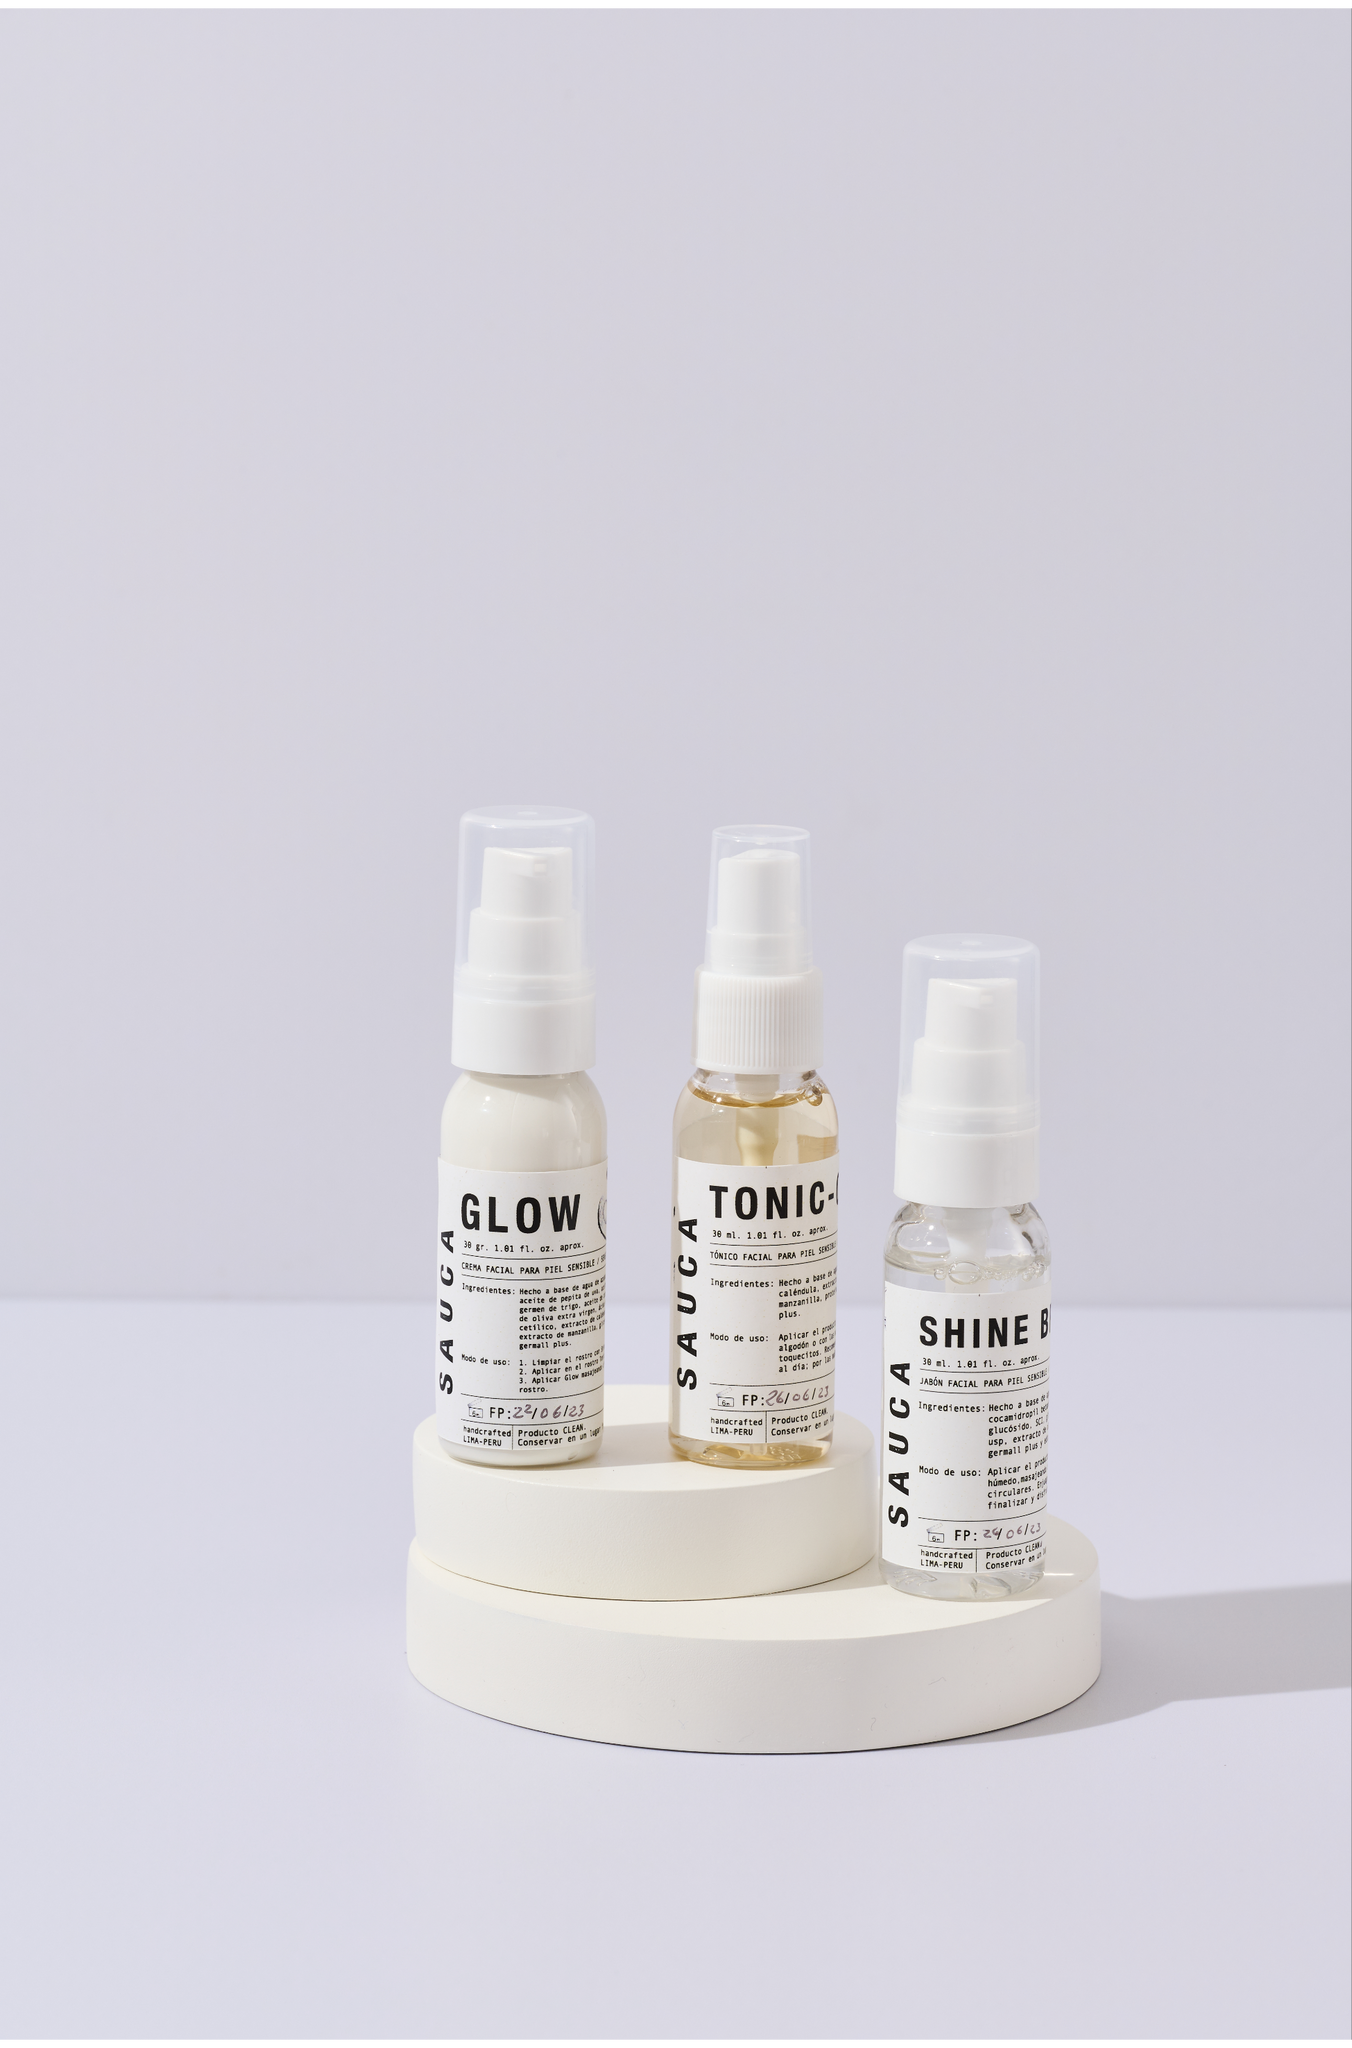 The skin care set travel size